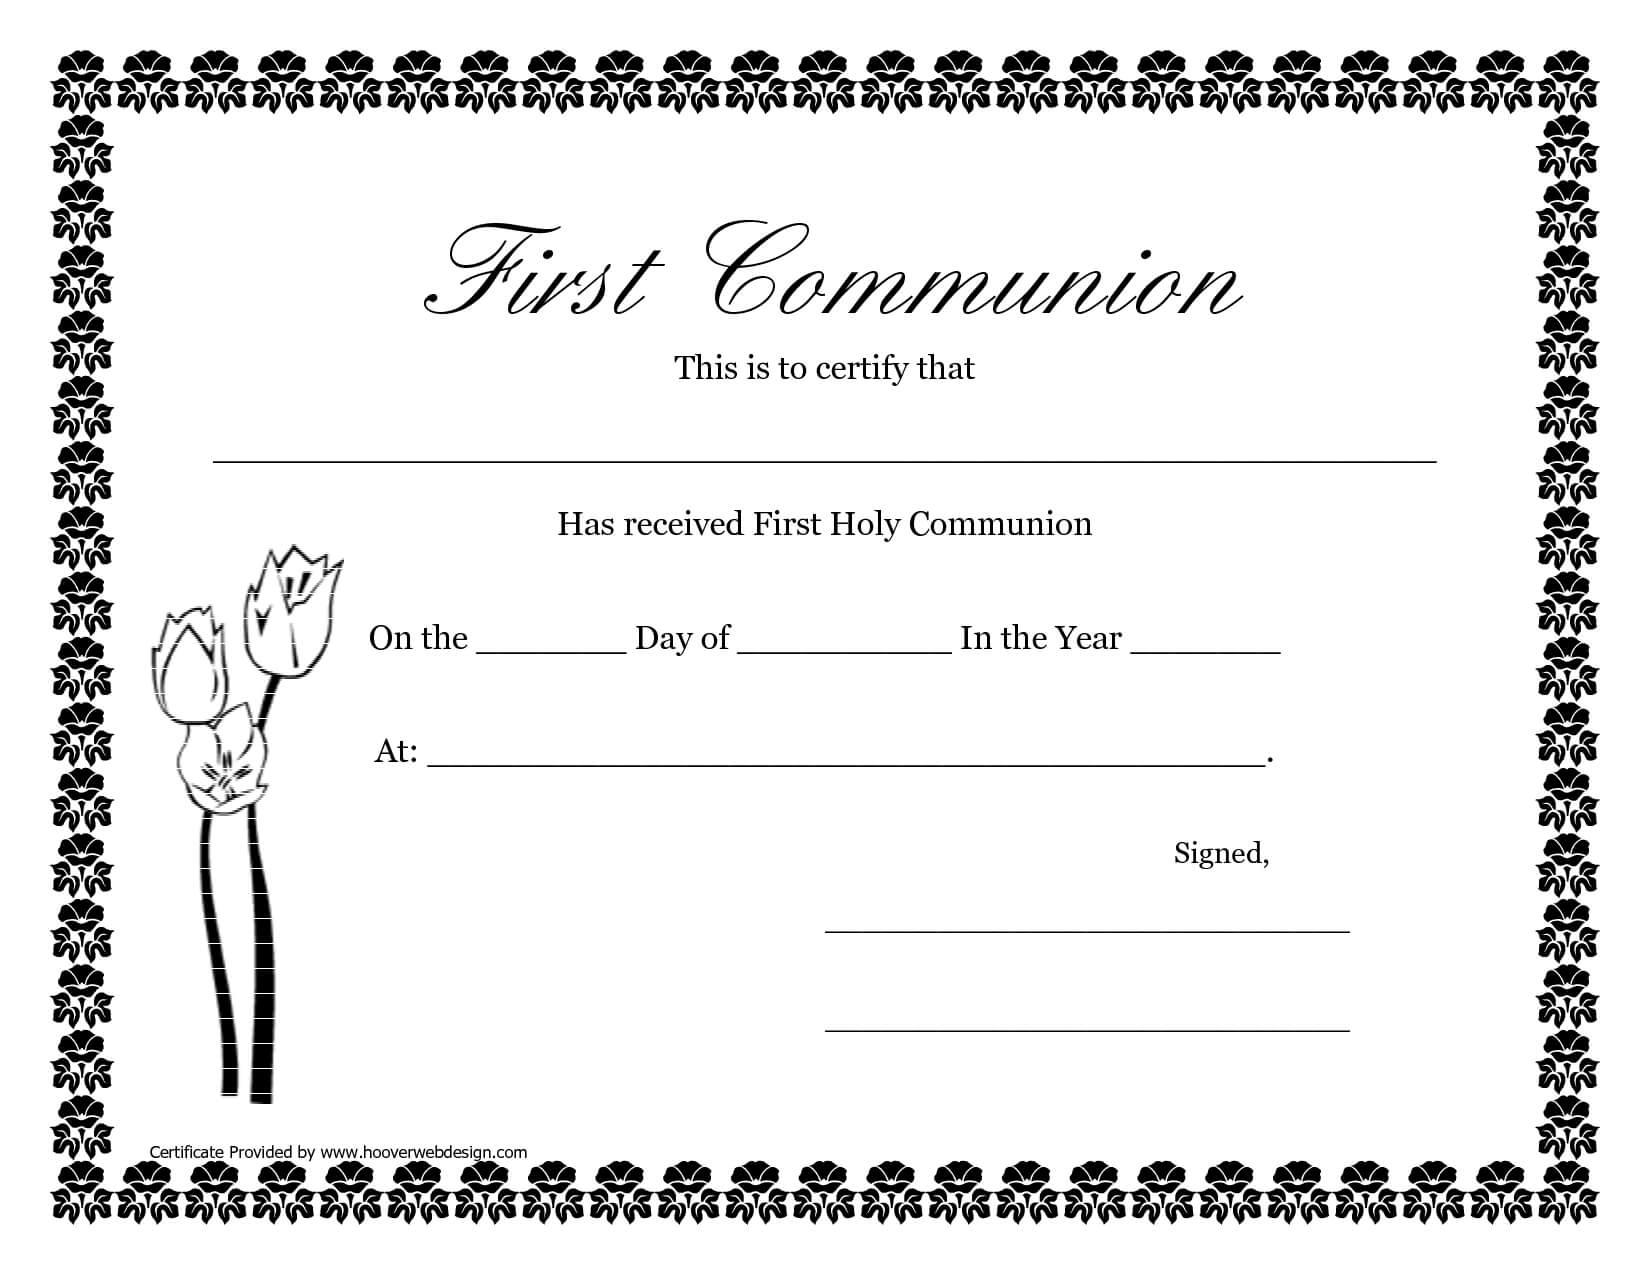 First Communion Banner Templates | Printable First Communion Inside First Holy Communion Banner Templates